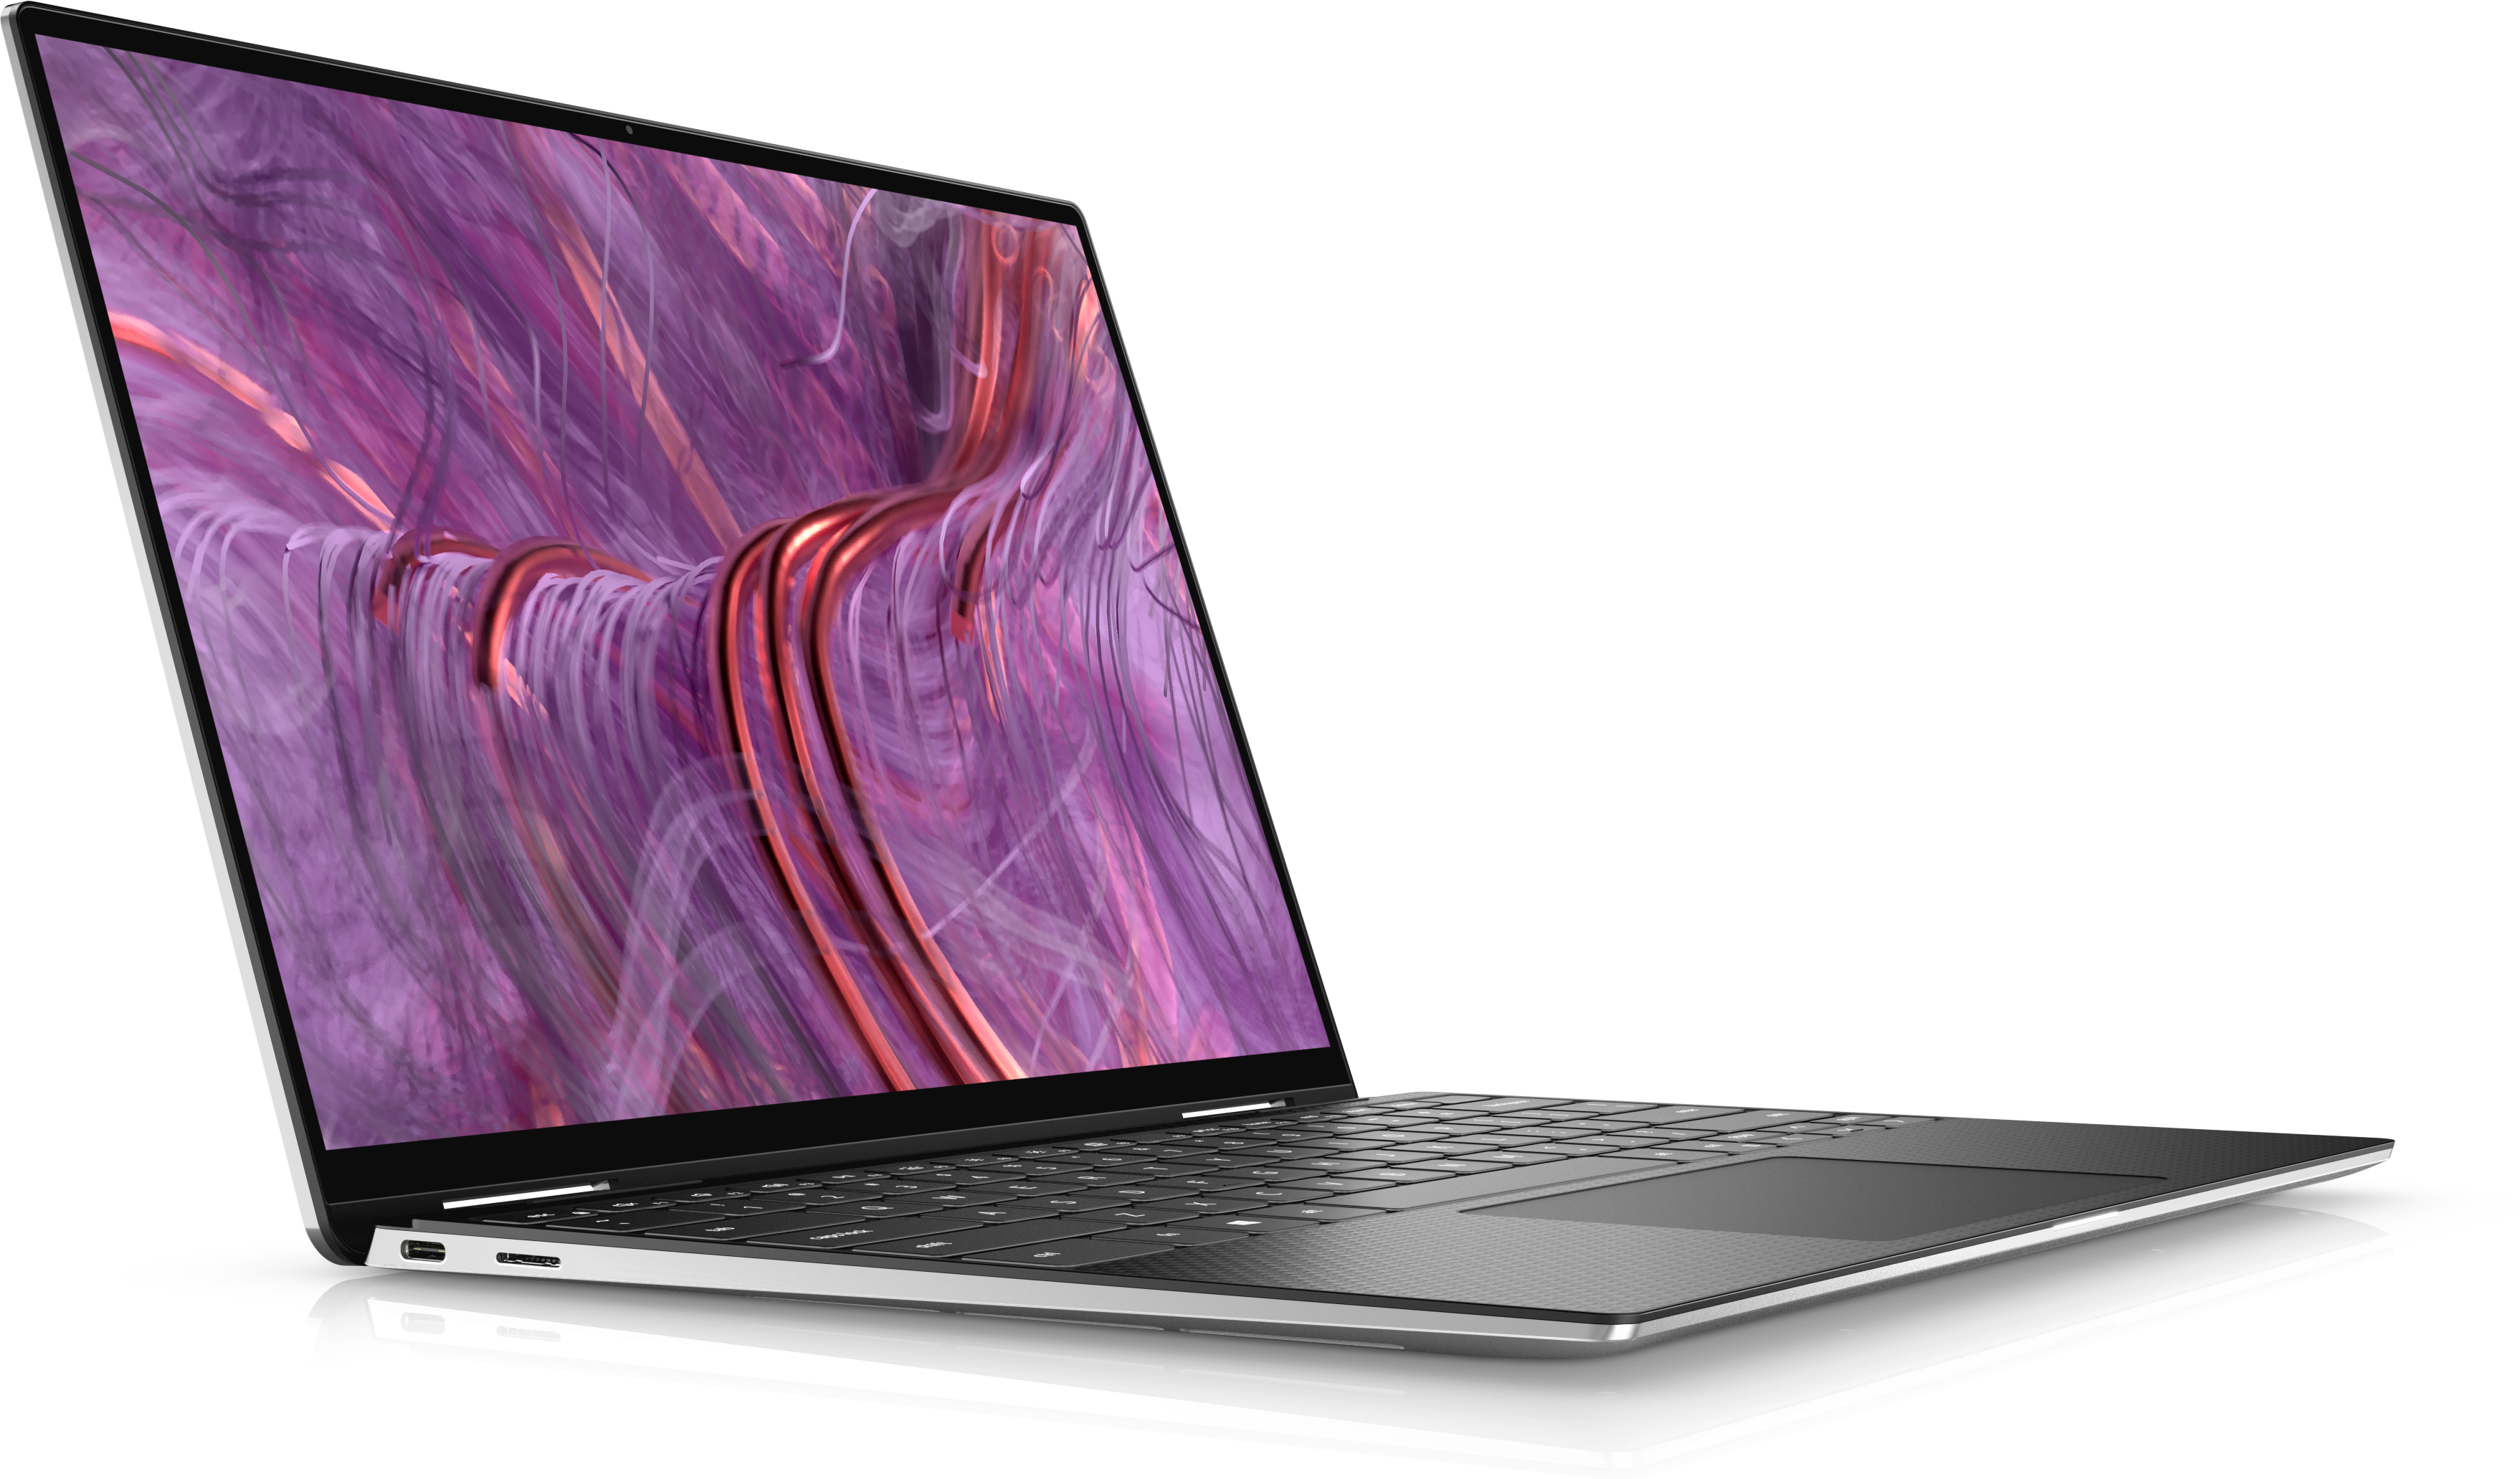 Dell XPS 9310 2-in-1 Laptop | Dell USA